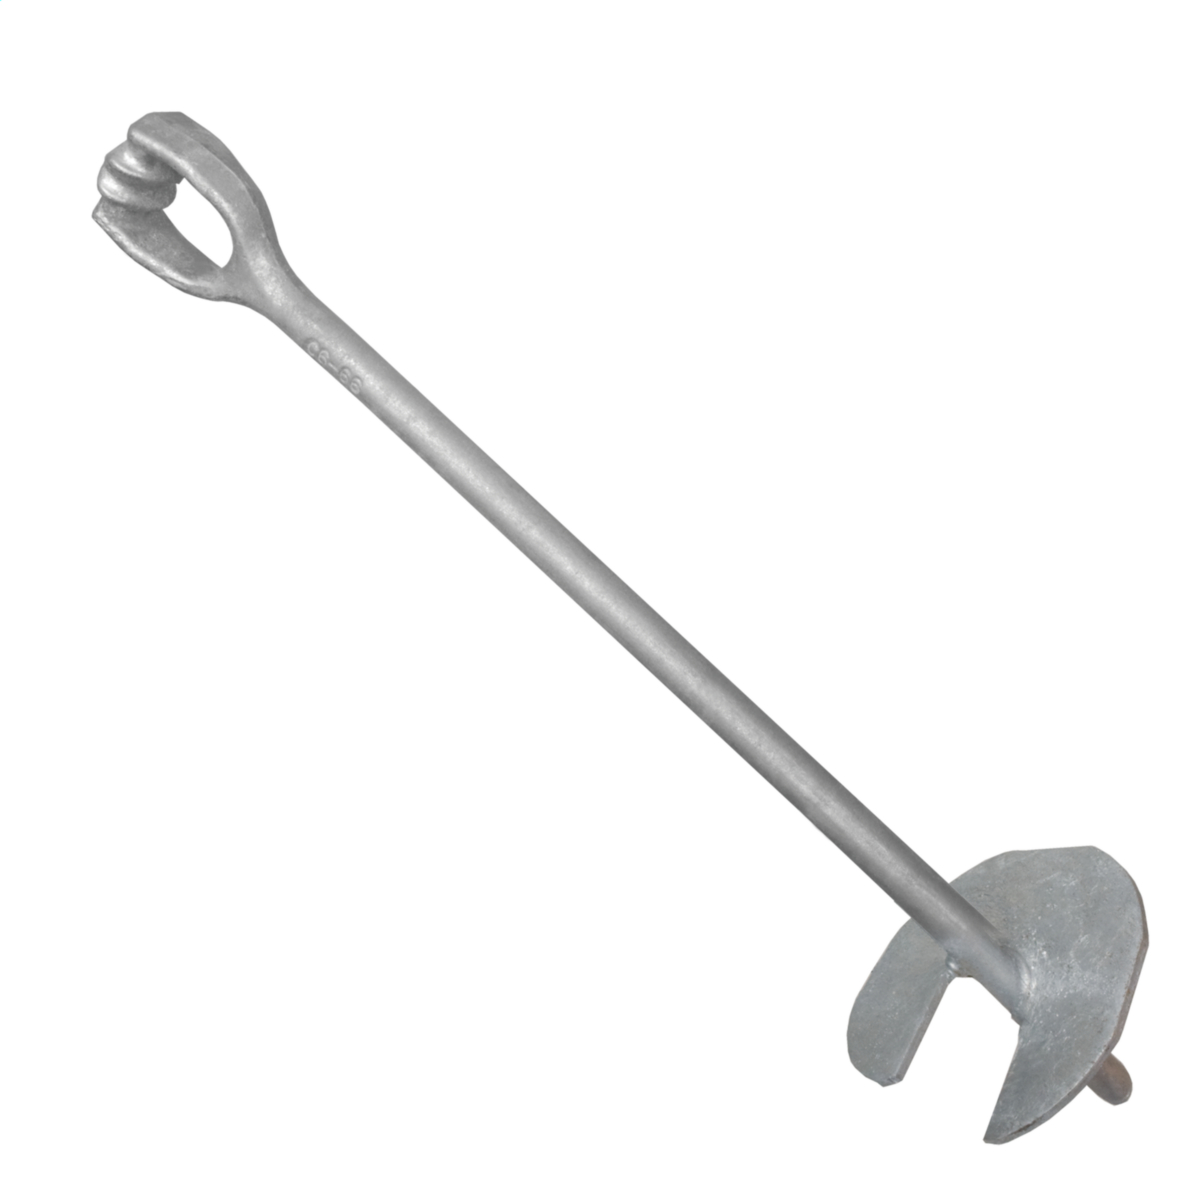  MADHOLLY Universal Ice Anchor Tool- Ice Anchor Power